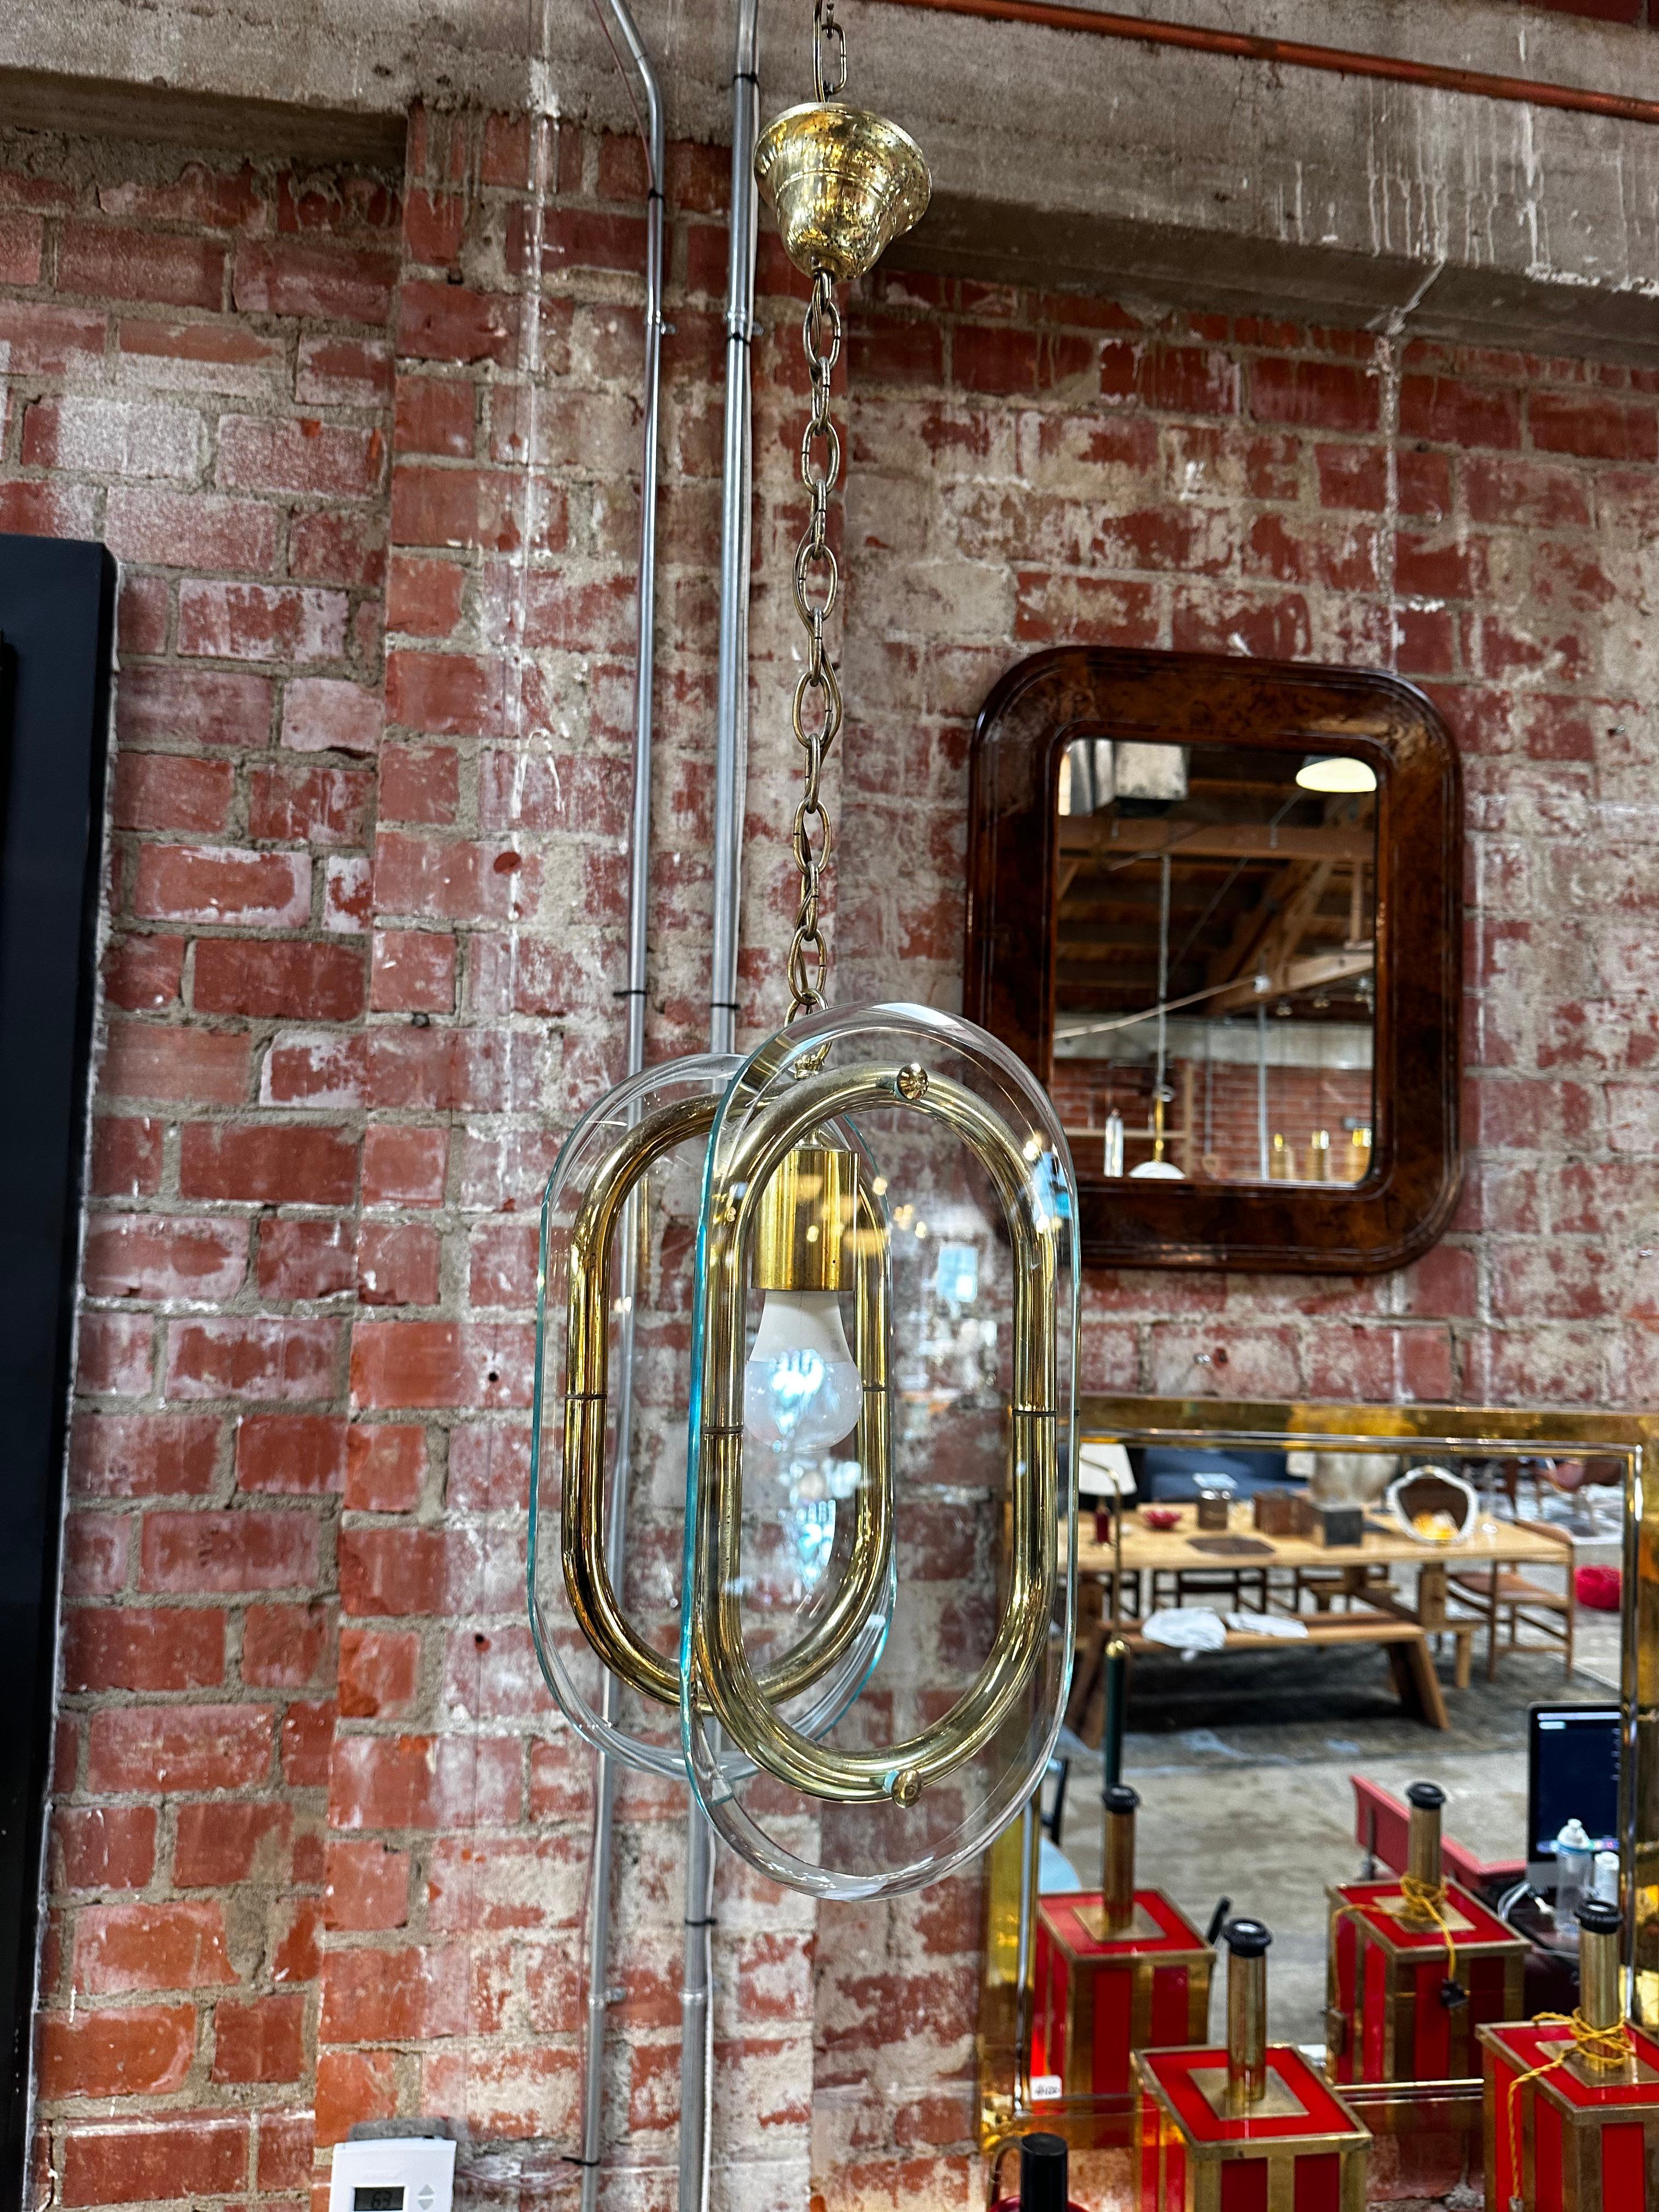 The Mid Century Italian Brass and Glass Pendant from the 1970s is a vintage lighting fixture characterized by its sleek design, featuring brass elements and glass components. This pendant exudes the distinctive style of mid-century Italian